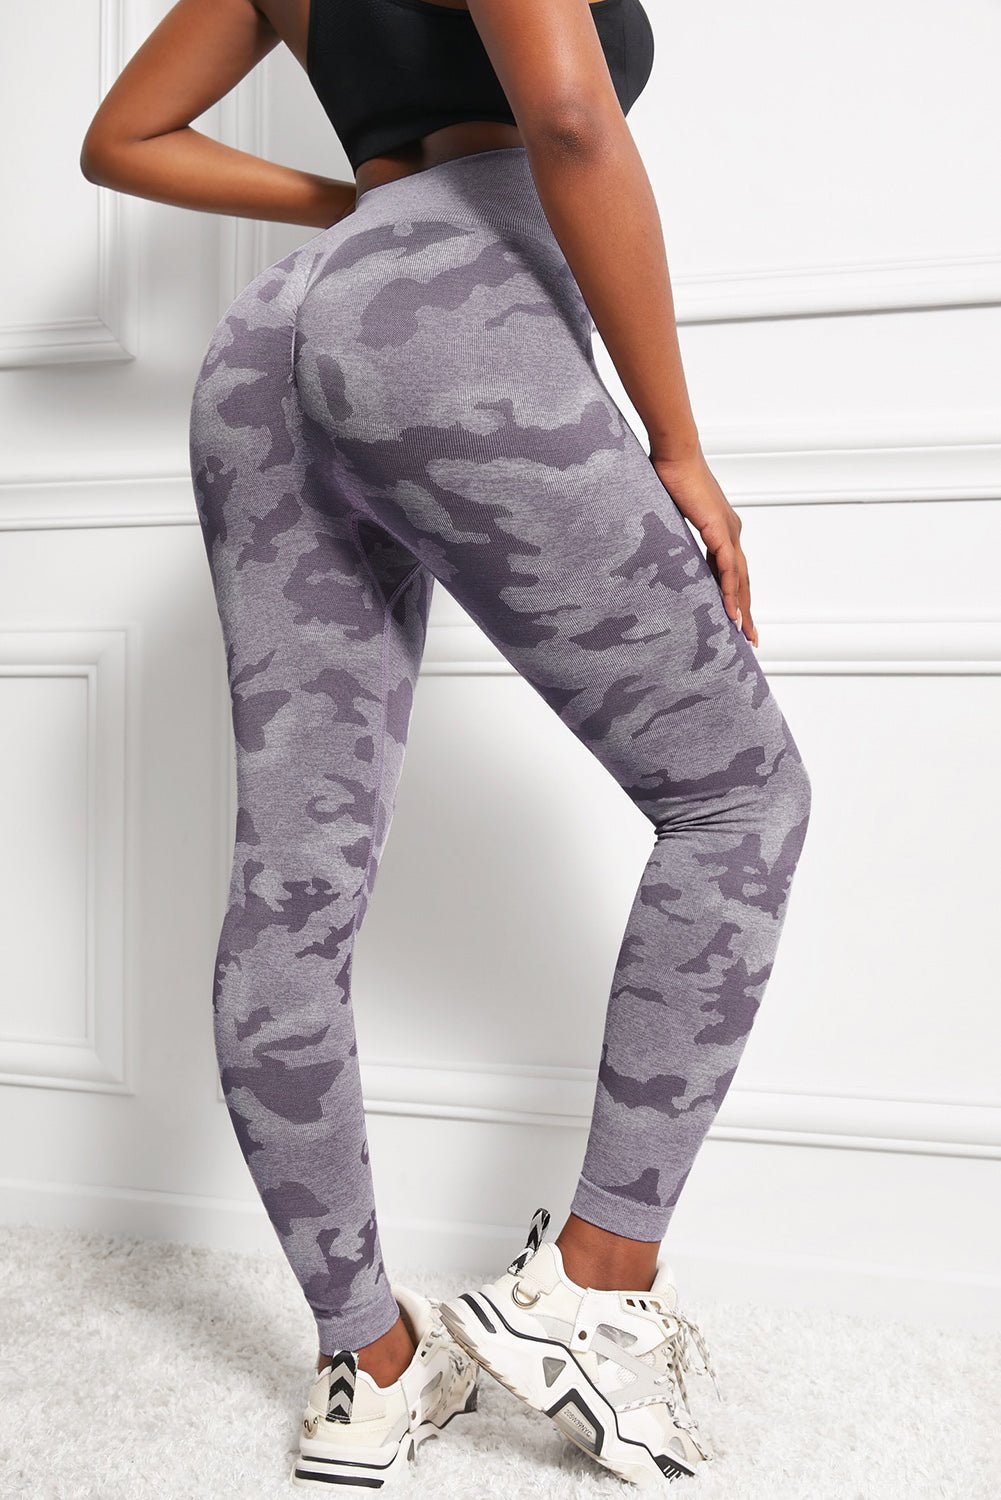 Camo Print Seamless High Waist Yoga Leggings - Embrace Your Curves with Romance and Comfort - Luxurious Material. - Guy Christopher